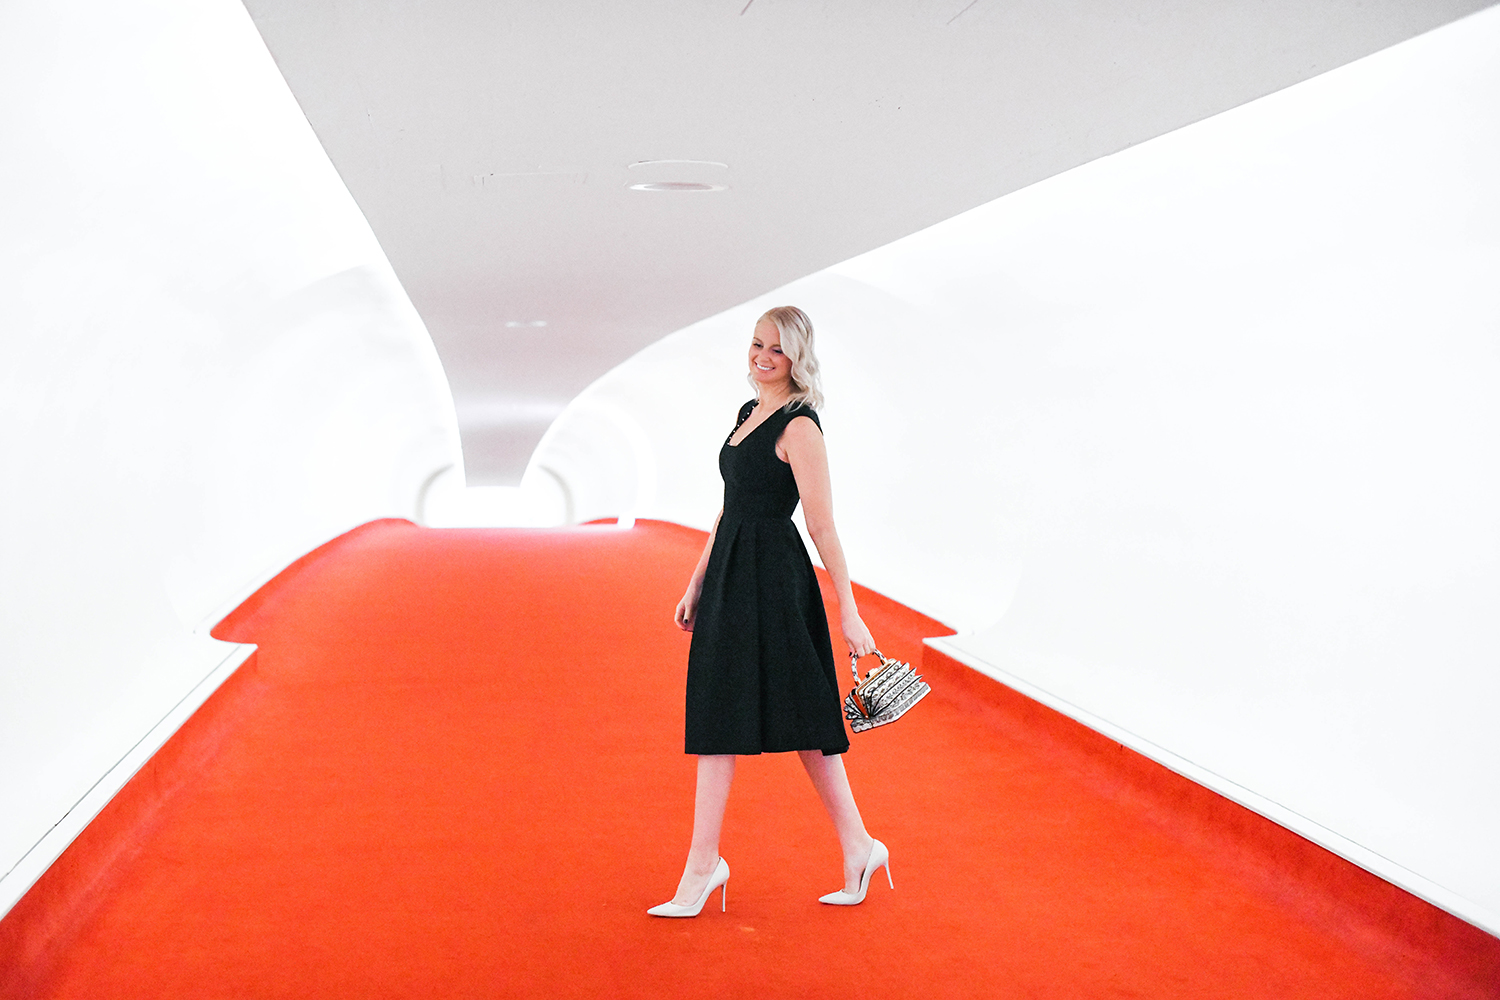 TWA HOTEL // PHOTOS AND REVIEW